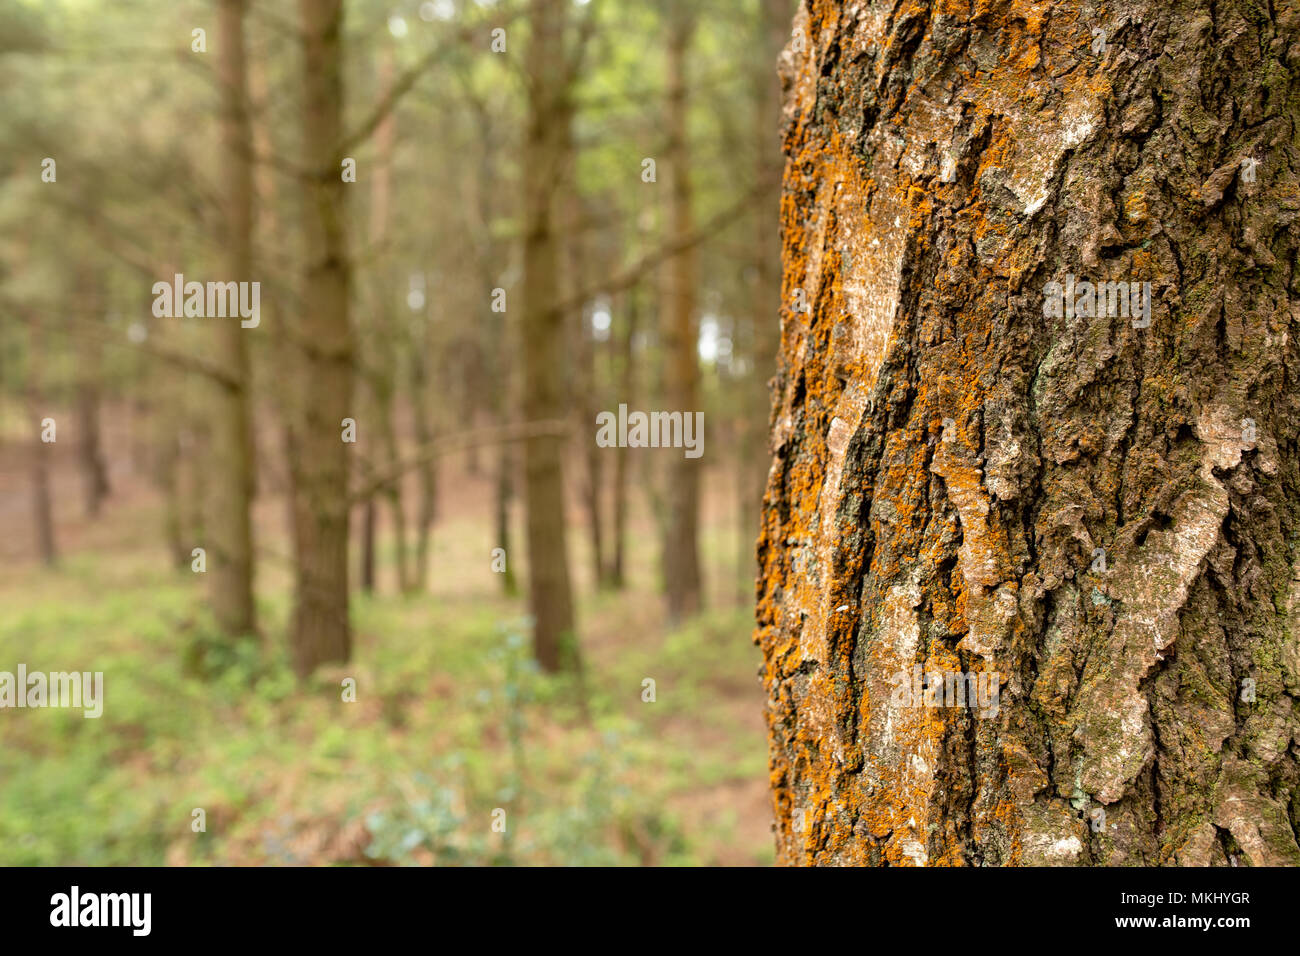 Colour photograph with close-up of Pine tree trunk in foreground covered in orange lichen with woodland scene blurred in background Stock Photo